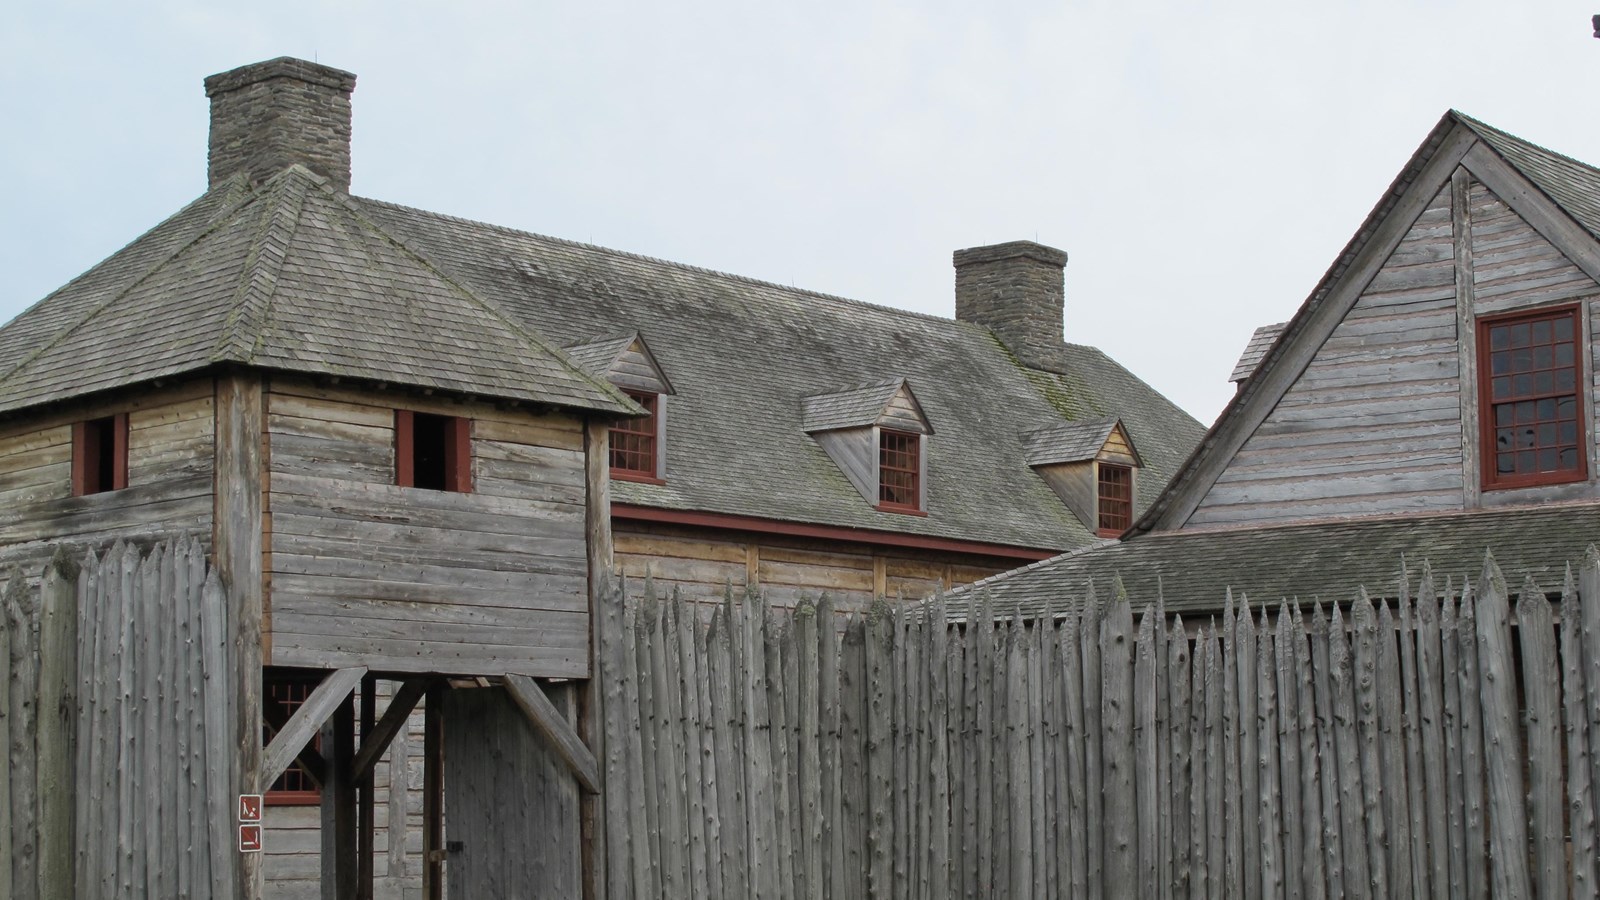 Wooden palisade in front of historically reconstructed unpainted wood buildings